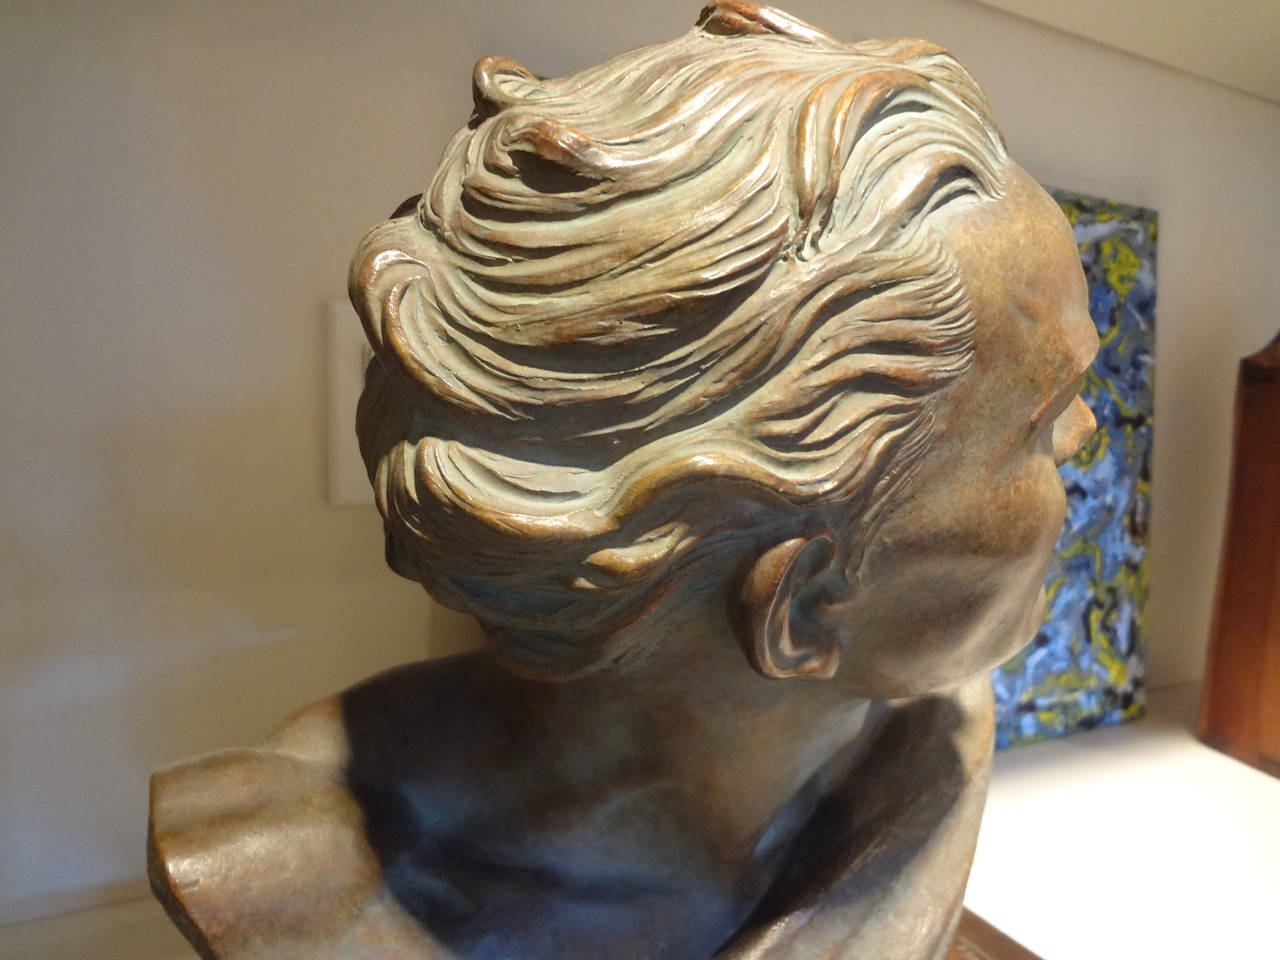 Mid-20th Century French Art Deco Patinated Terra Cotta Bust By U. Cipriani, Circa. 1930